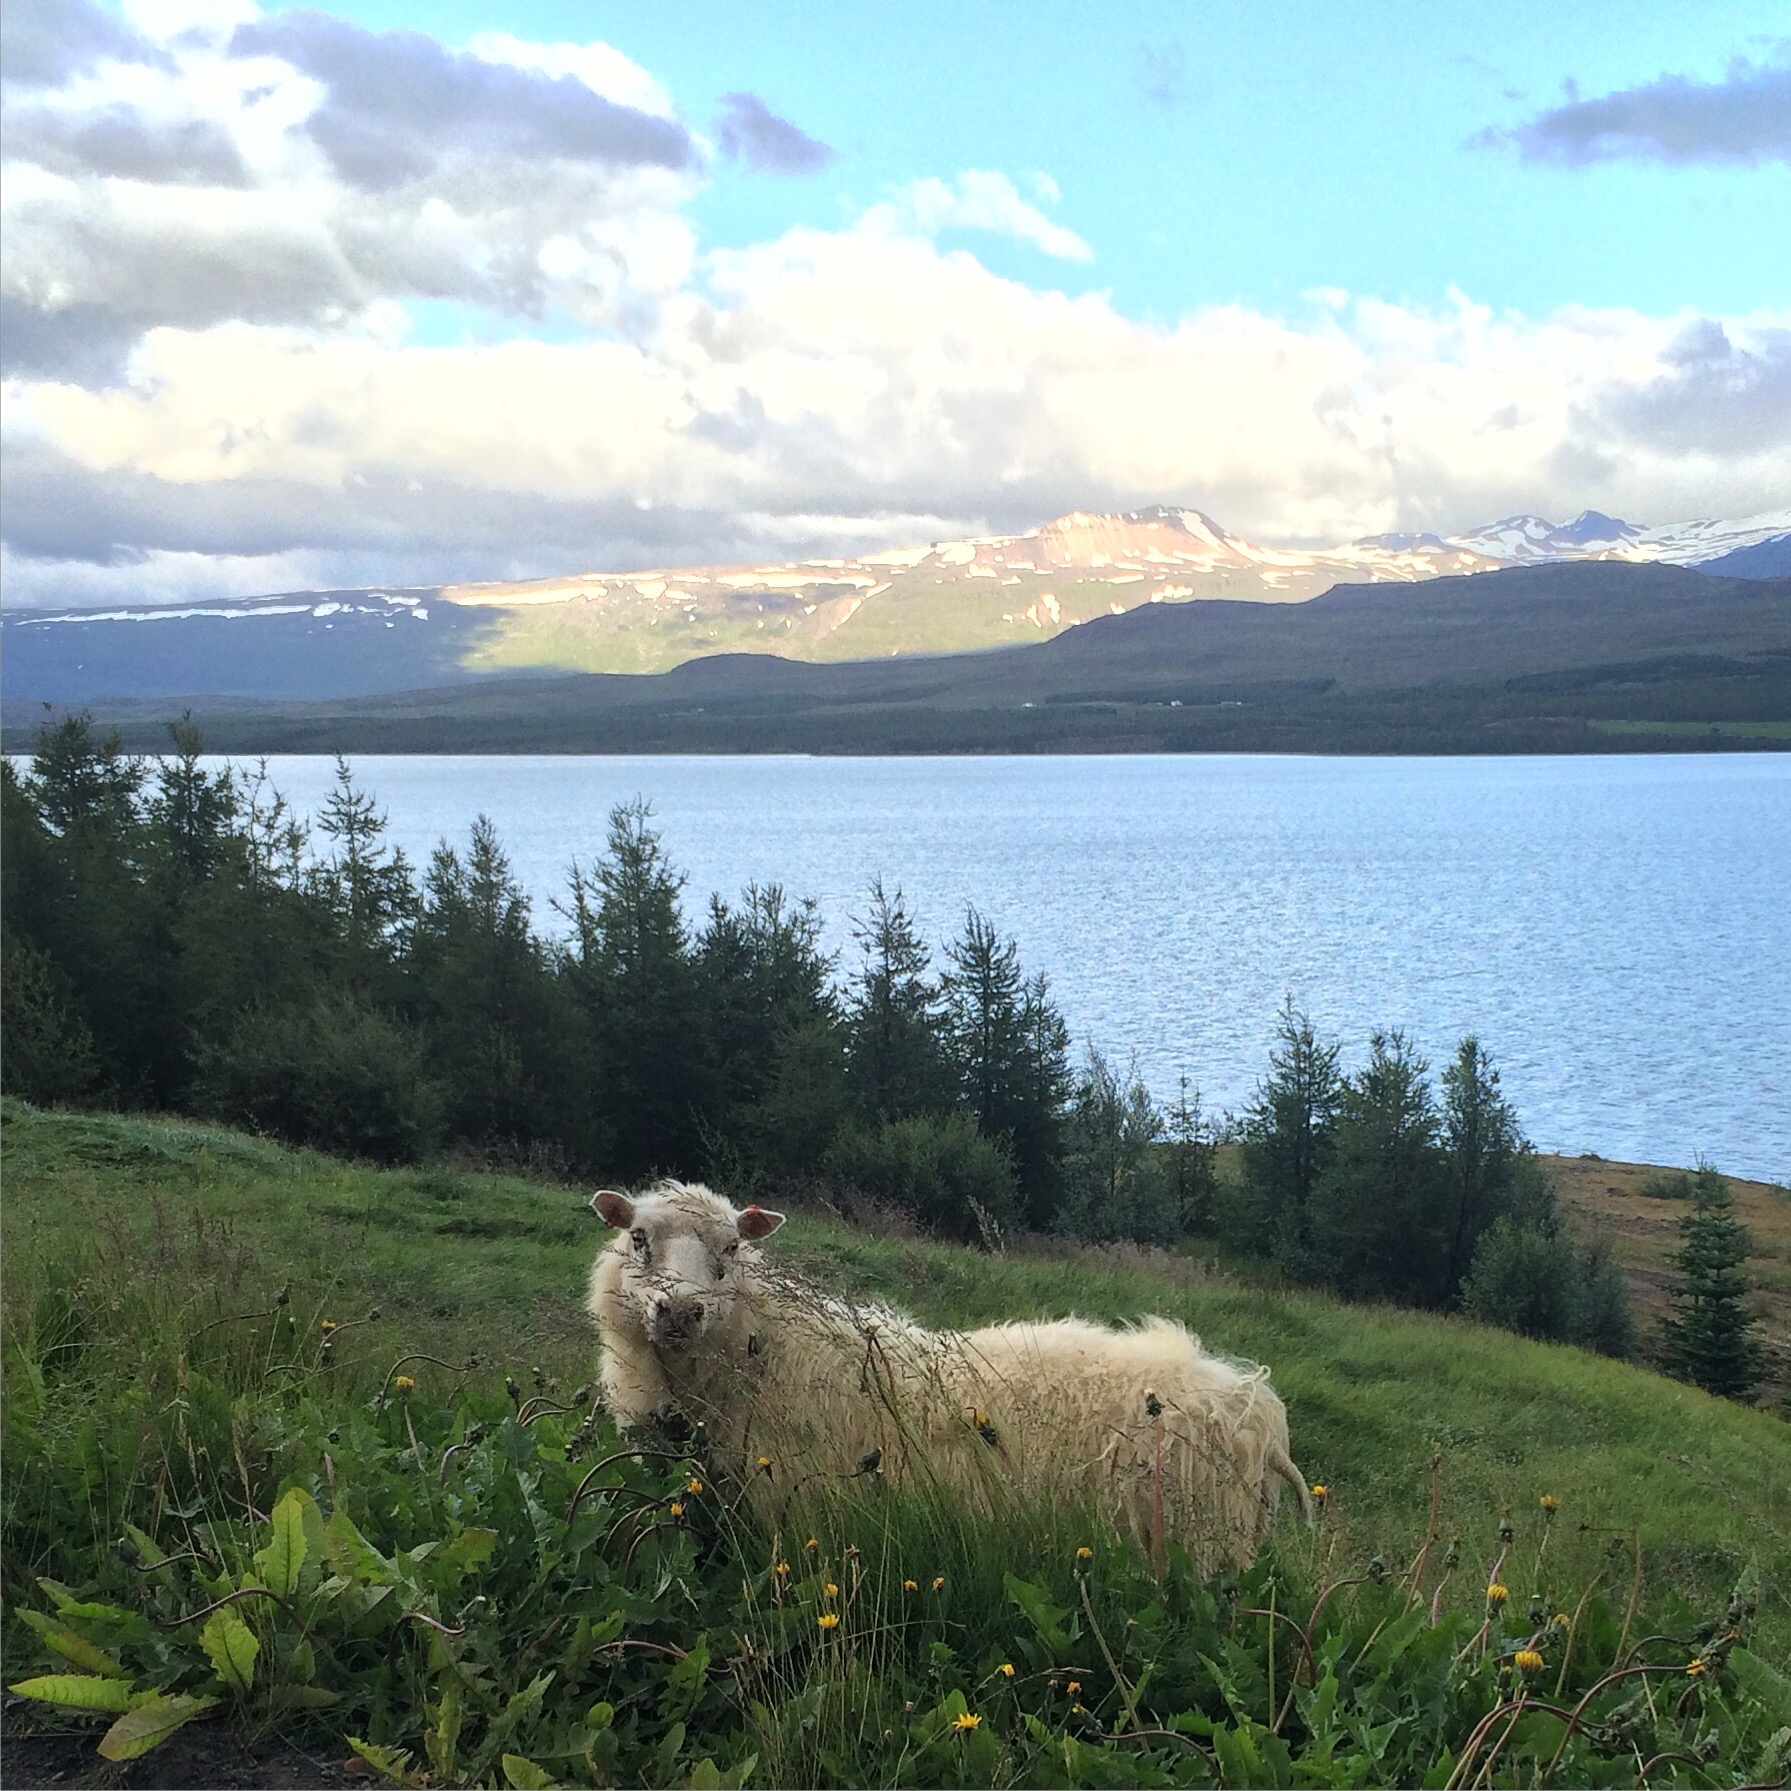 Sheep, somewhere in Iceland